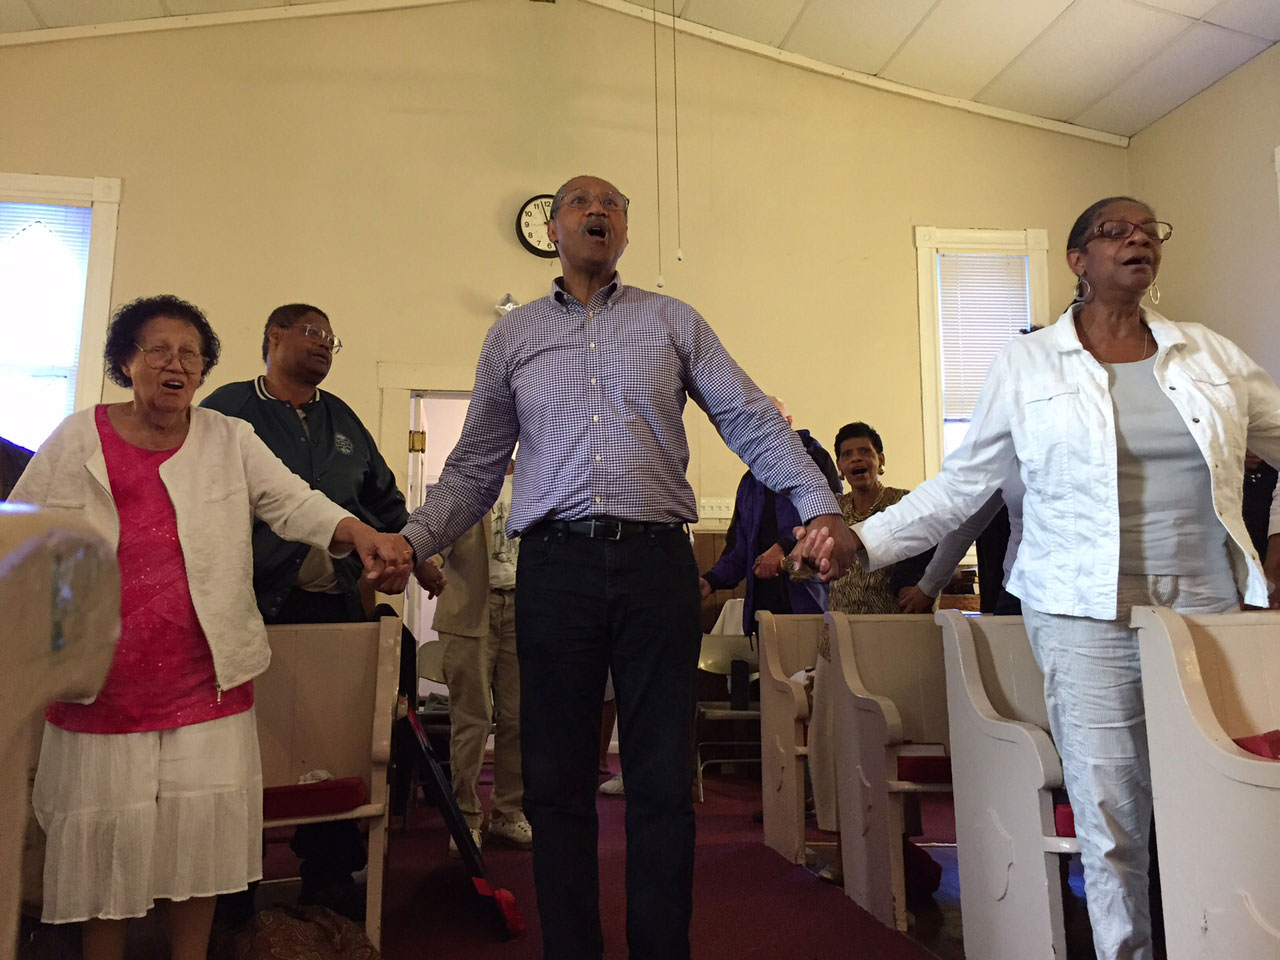 Residents worshiping in the historic Pleasant View Methodist Episcopal Church. (WTOP/Kate Ryan)